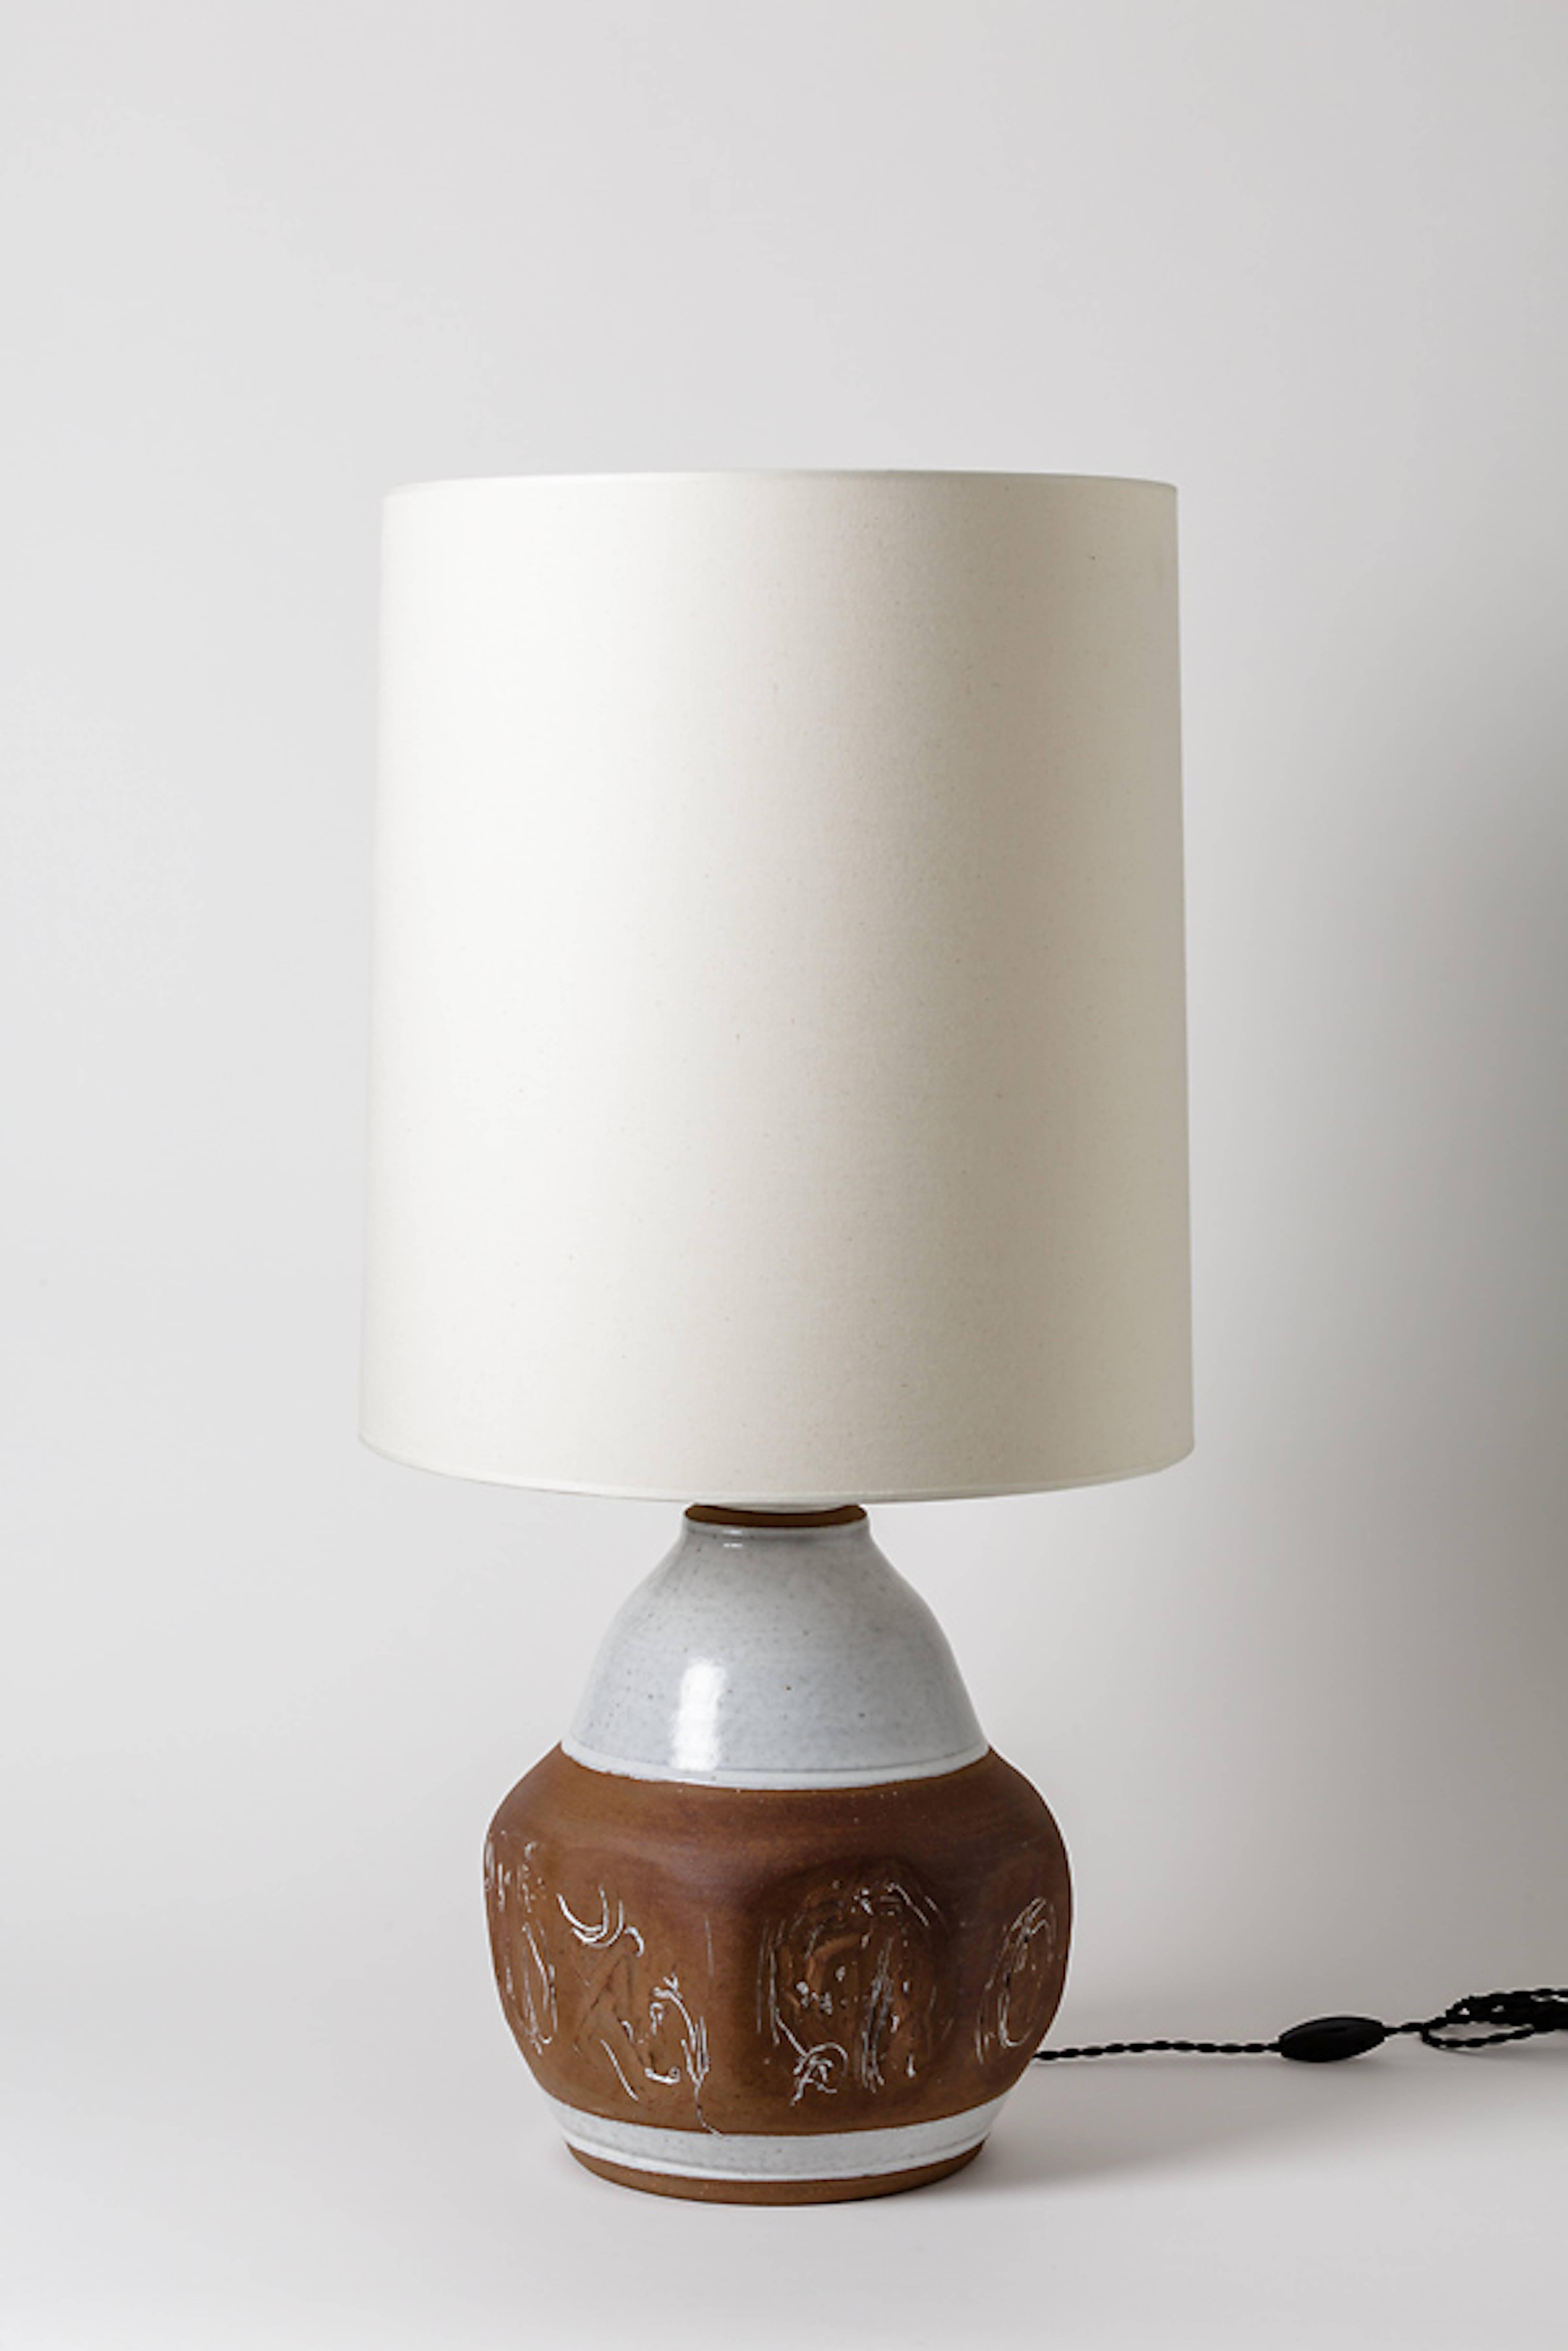 A stoneware table lamp by Roger Collet with glazed decoration.
Perfect original conditions.
Unique piece.
Signed at the base 